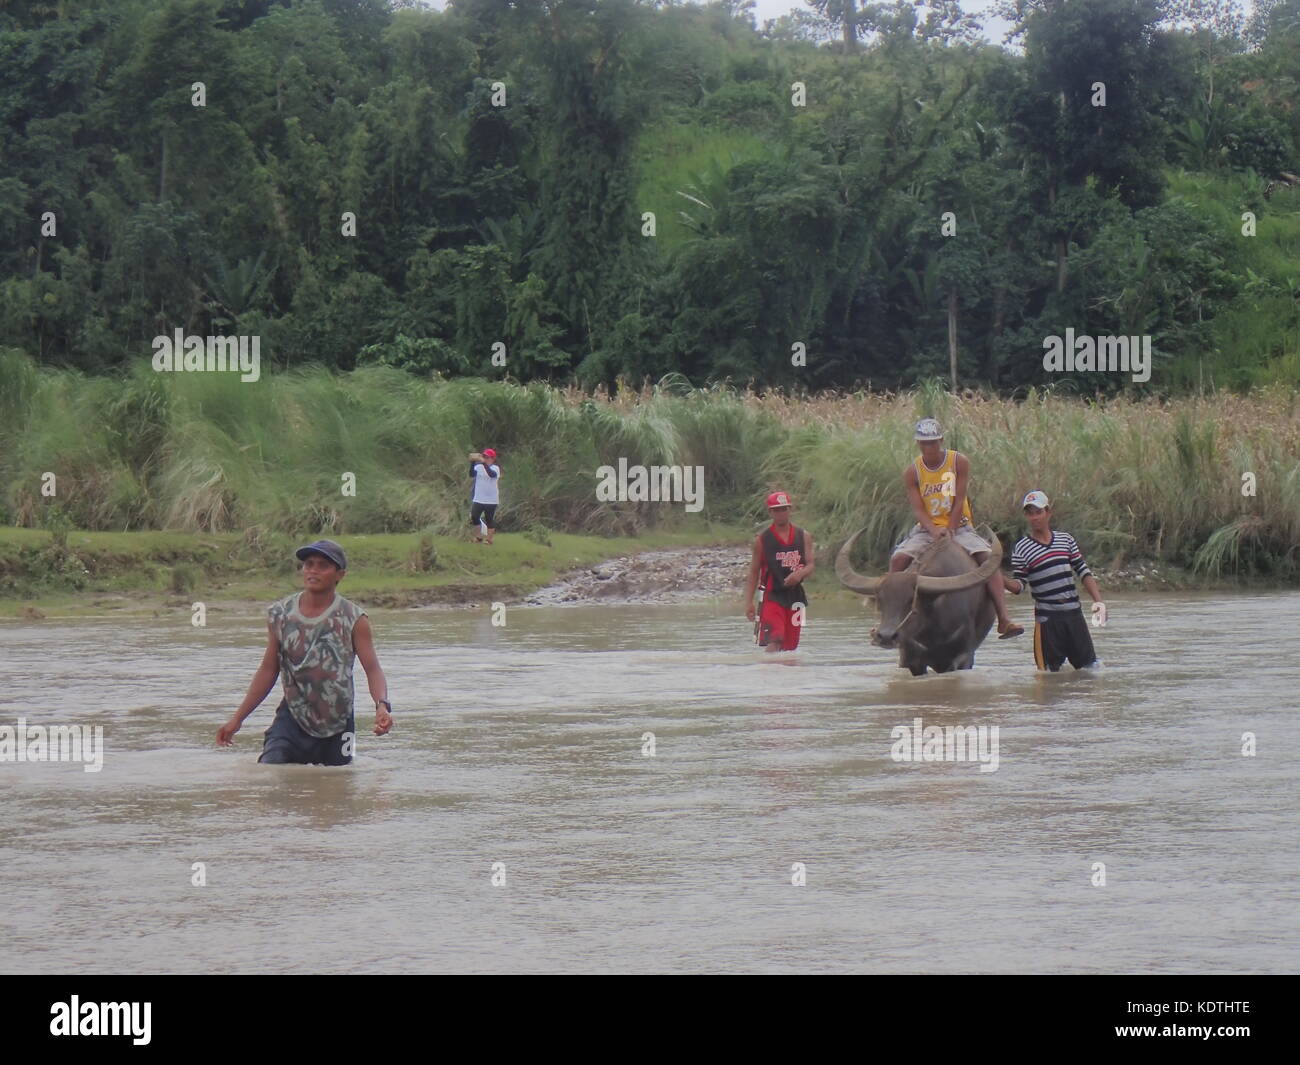 Philippines. 14th Oct, 2017. Severe tropical depression Odette made Sinundungan River in Cagayan Valley overflow. The strong water current made it not passable for people crossing the river. Farmers used their buffalo to cross the river and transport their harvest of vegetables and fruits to the market. Credit: Sherbien Dacalanio/Pacific Press/Alamy Live News Stock Photo